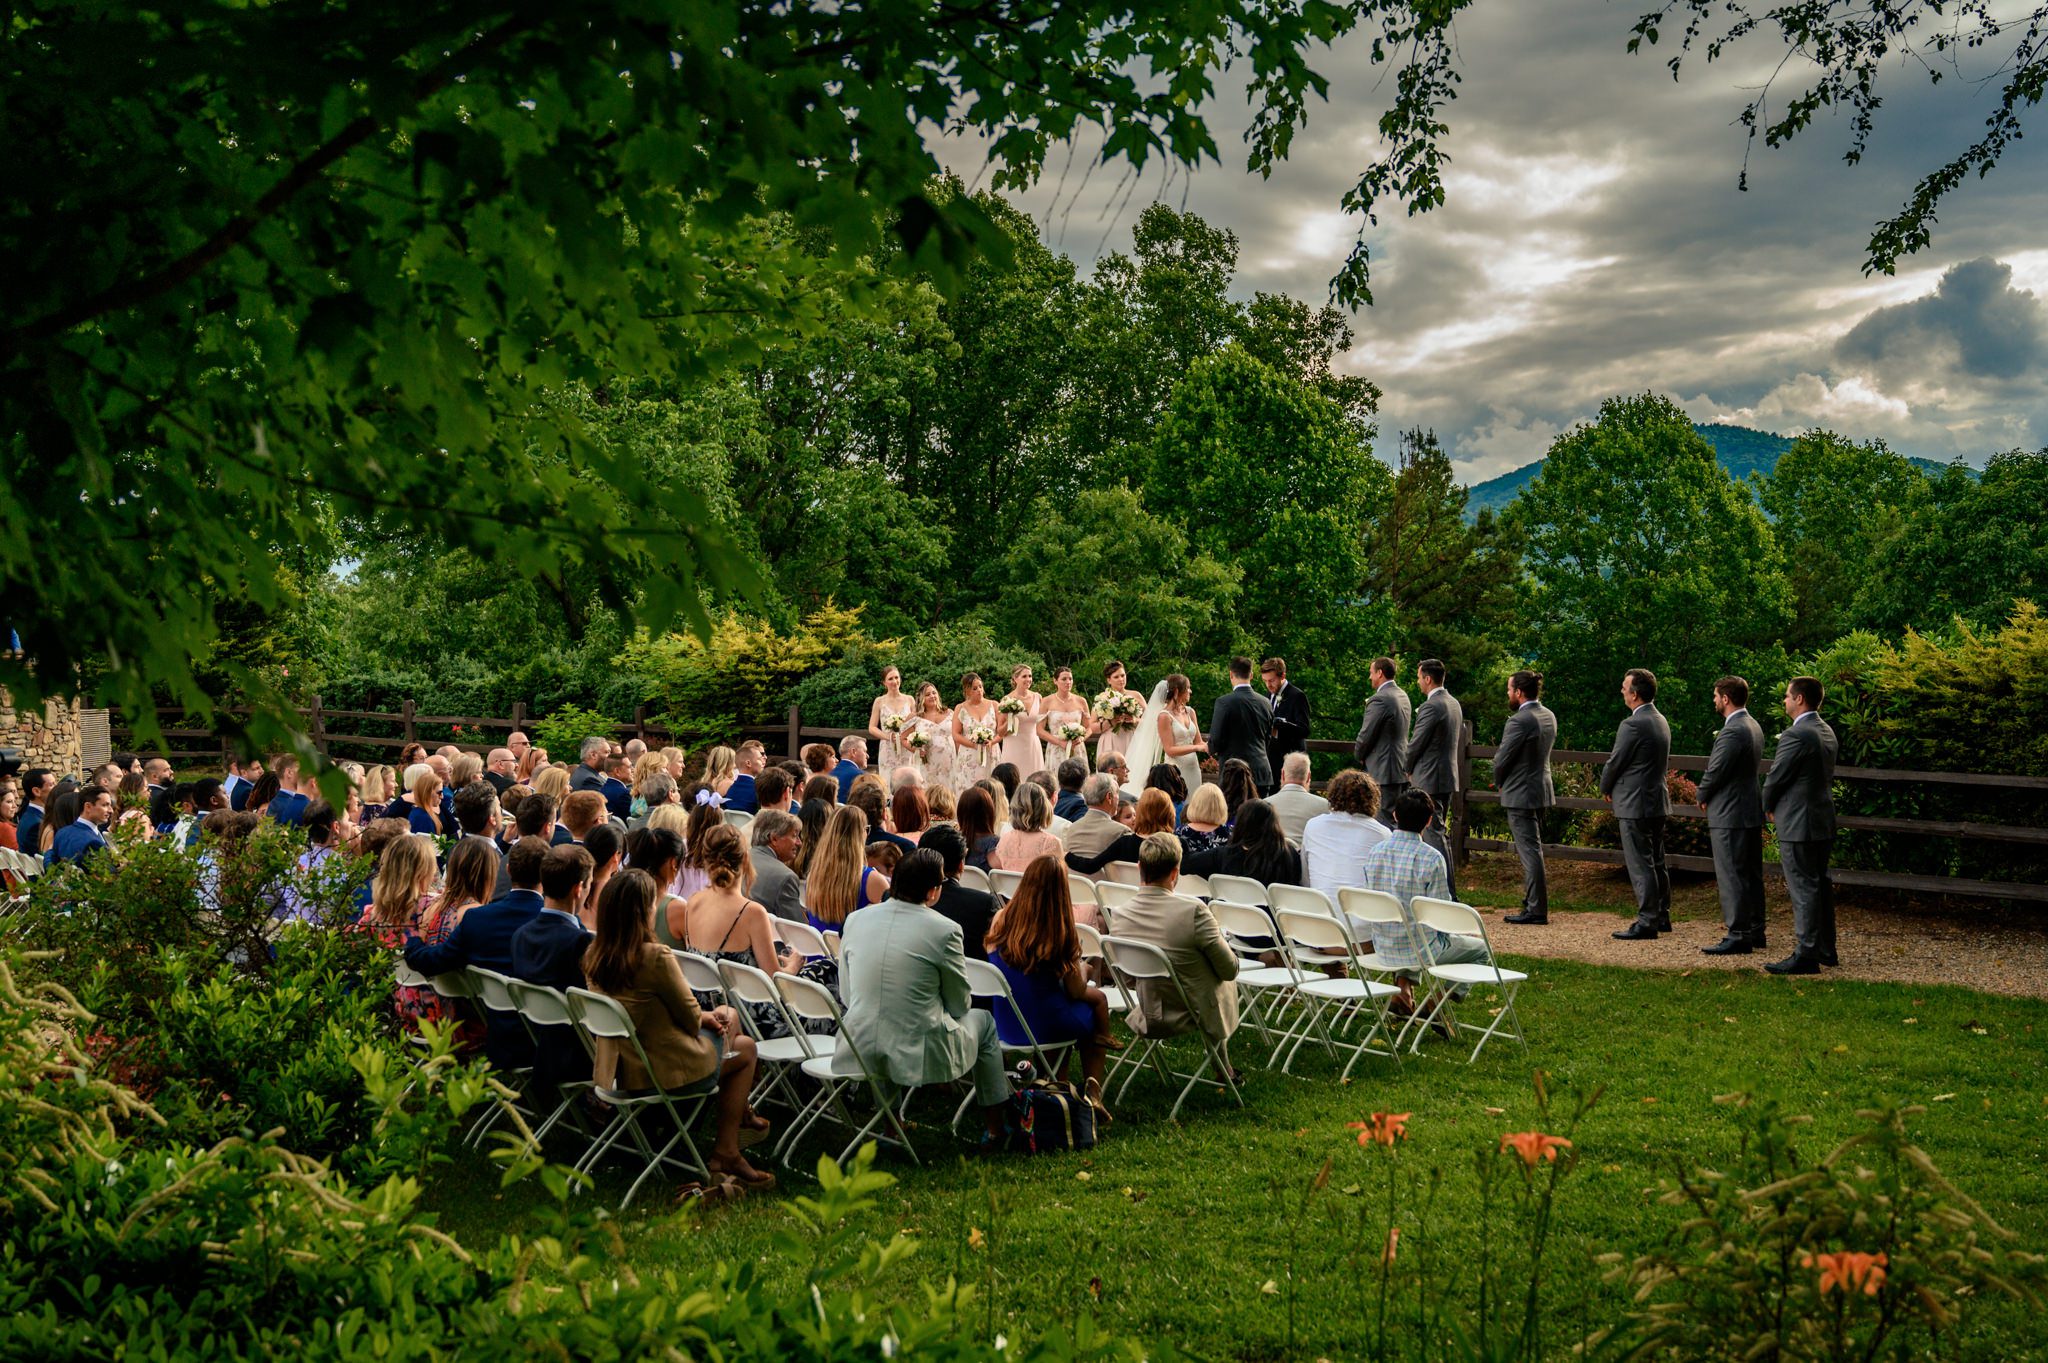 A documentary wedding photographer captures a scenic garden ceremony with mountains in the background at Crest Pavilion.